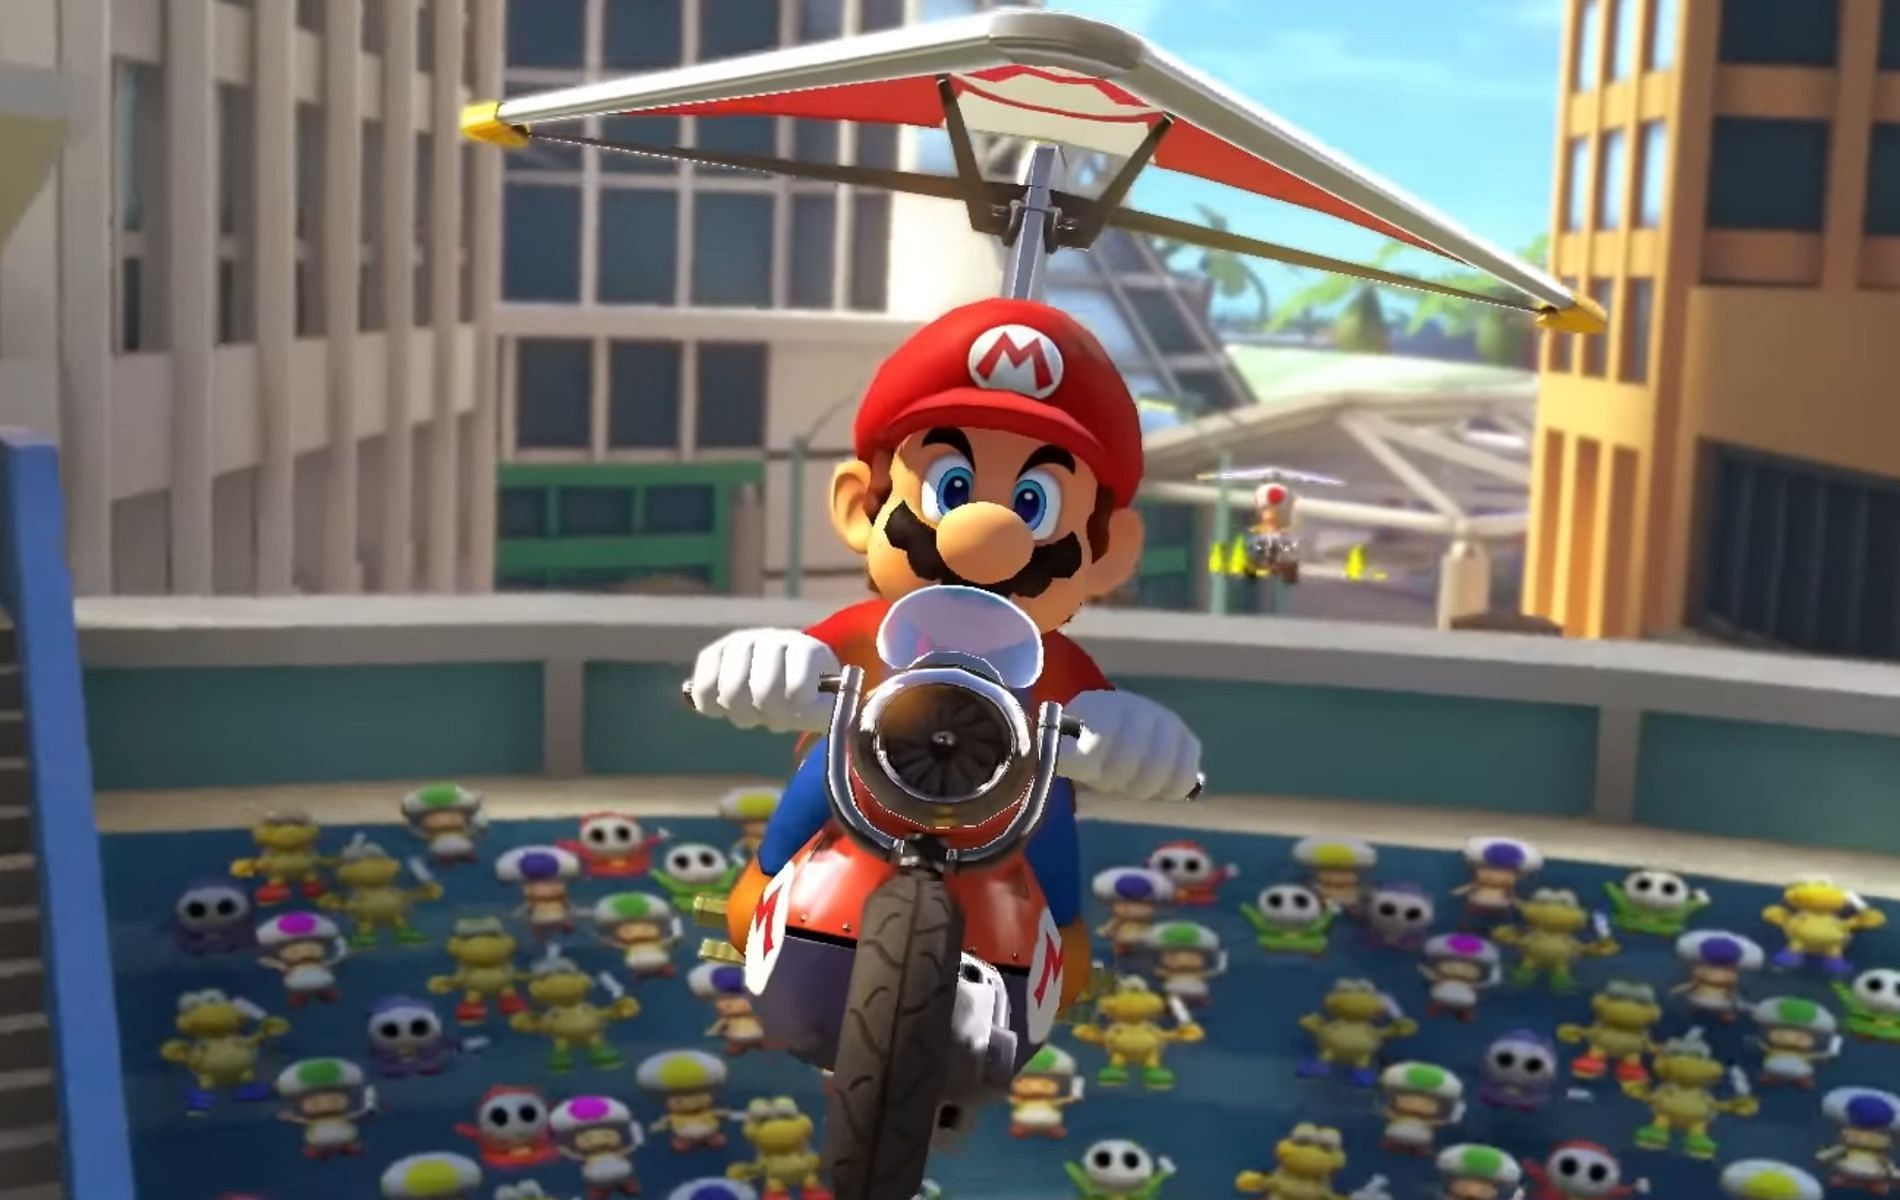 Mario Kart 8 Deluxe DLC Wave 5 release date revealed Included tracks